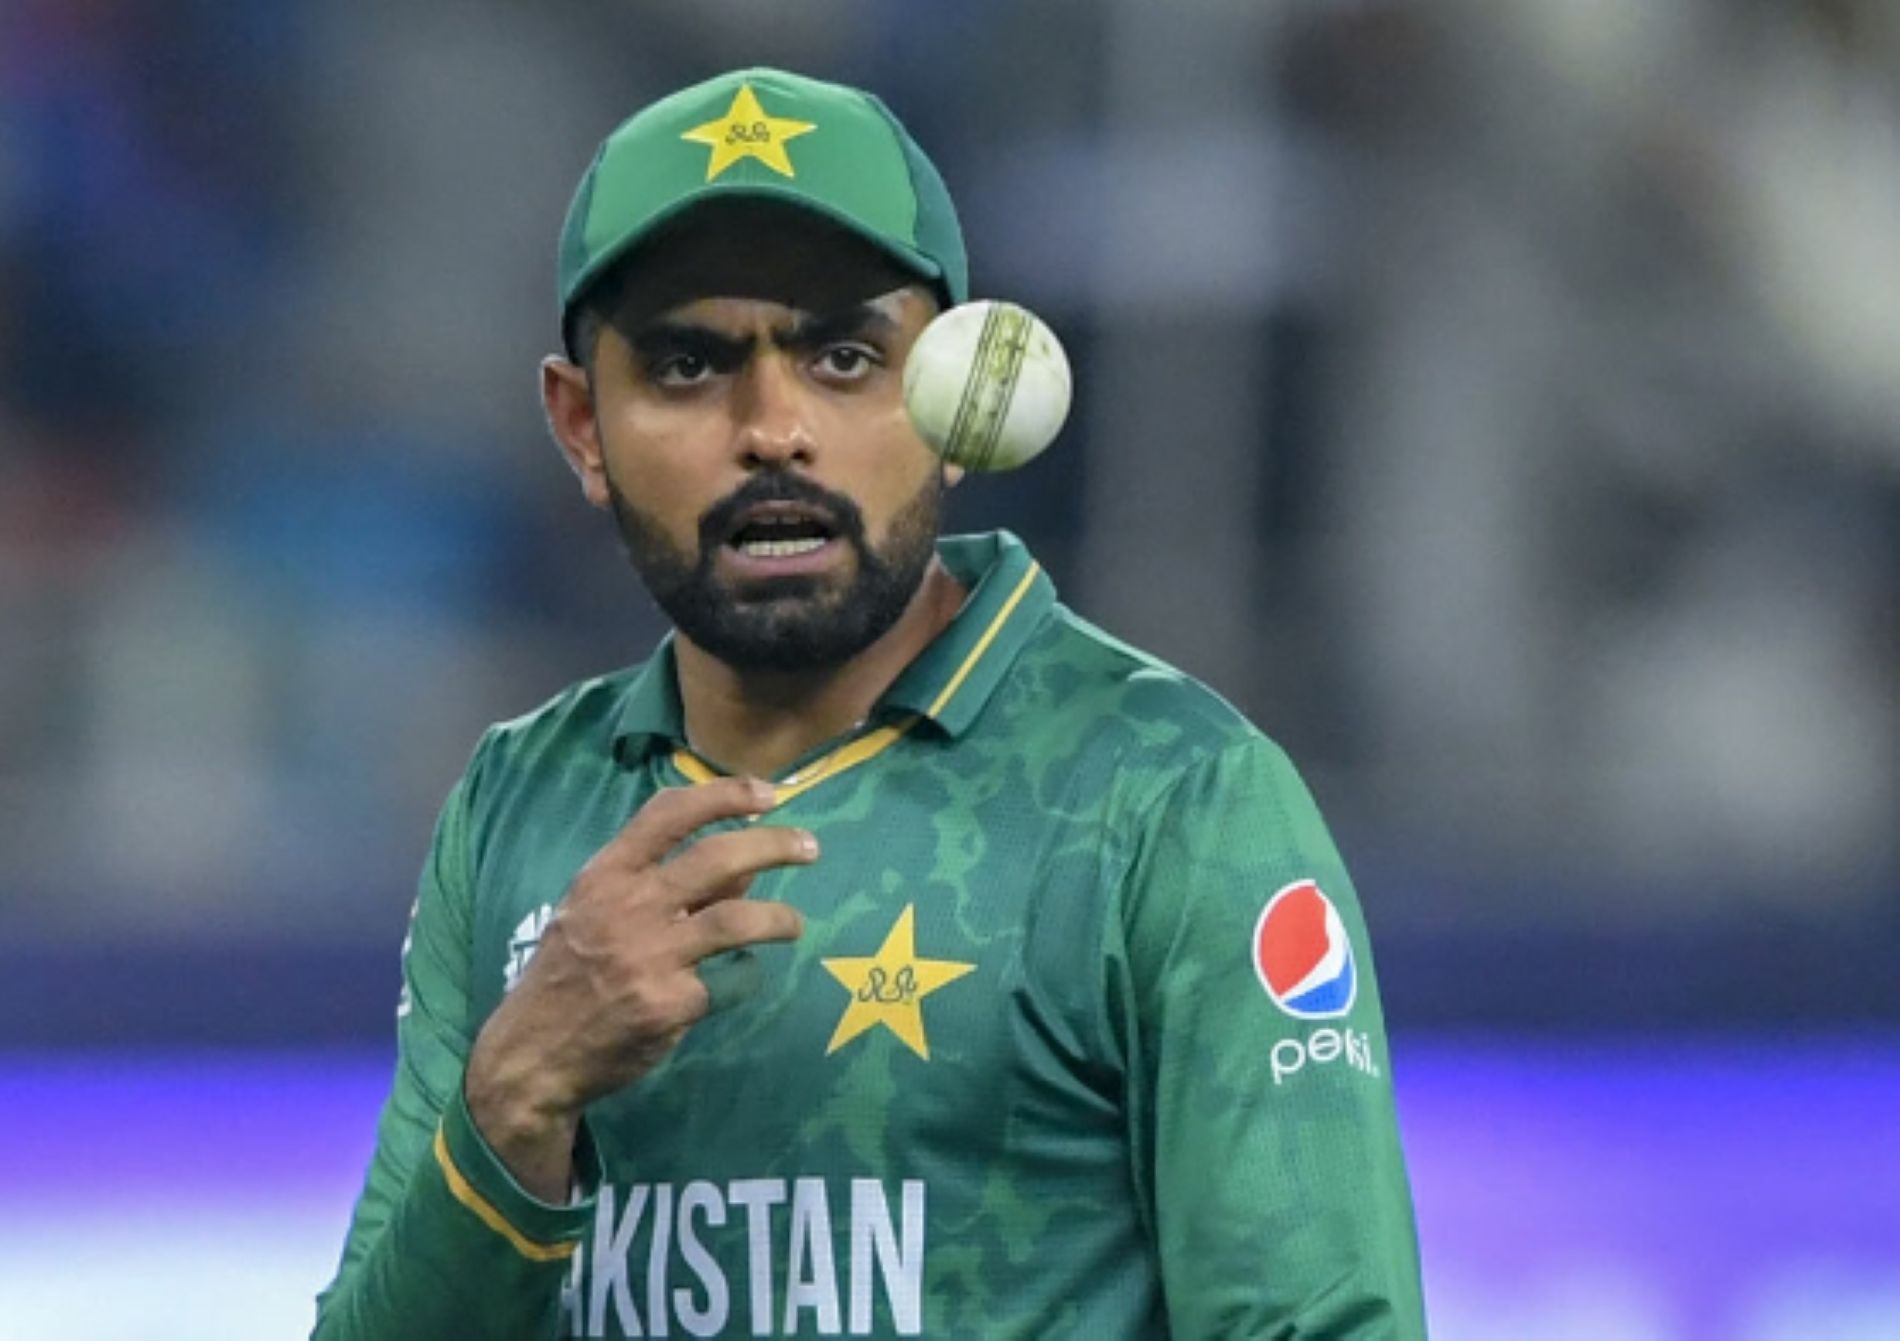 Babar was heavily criticized during Pakistan